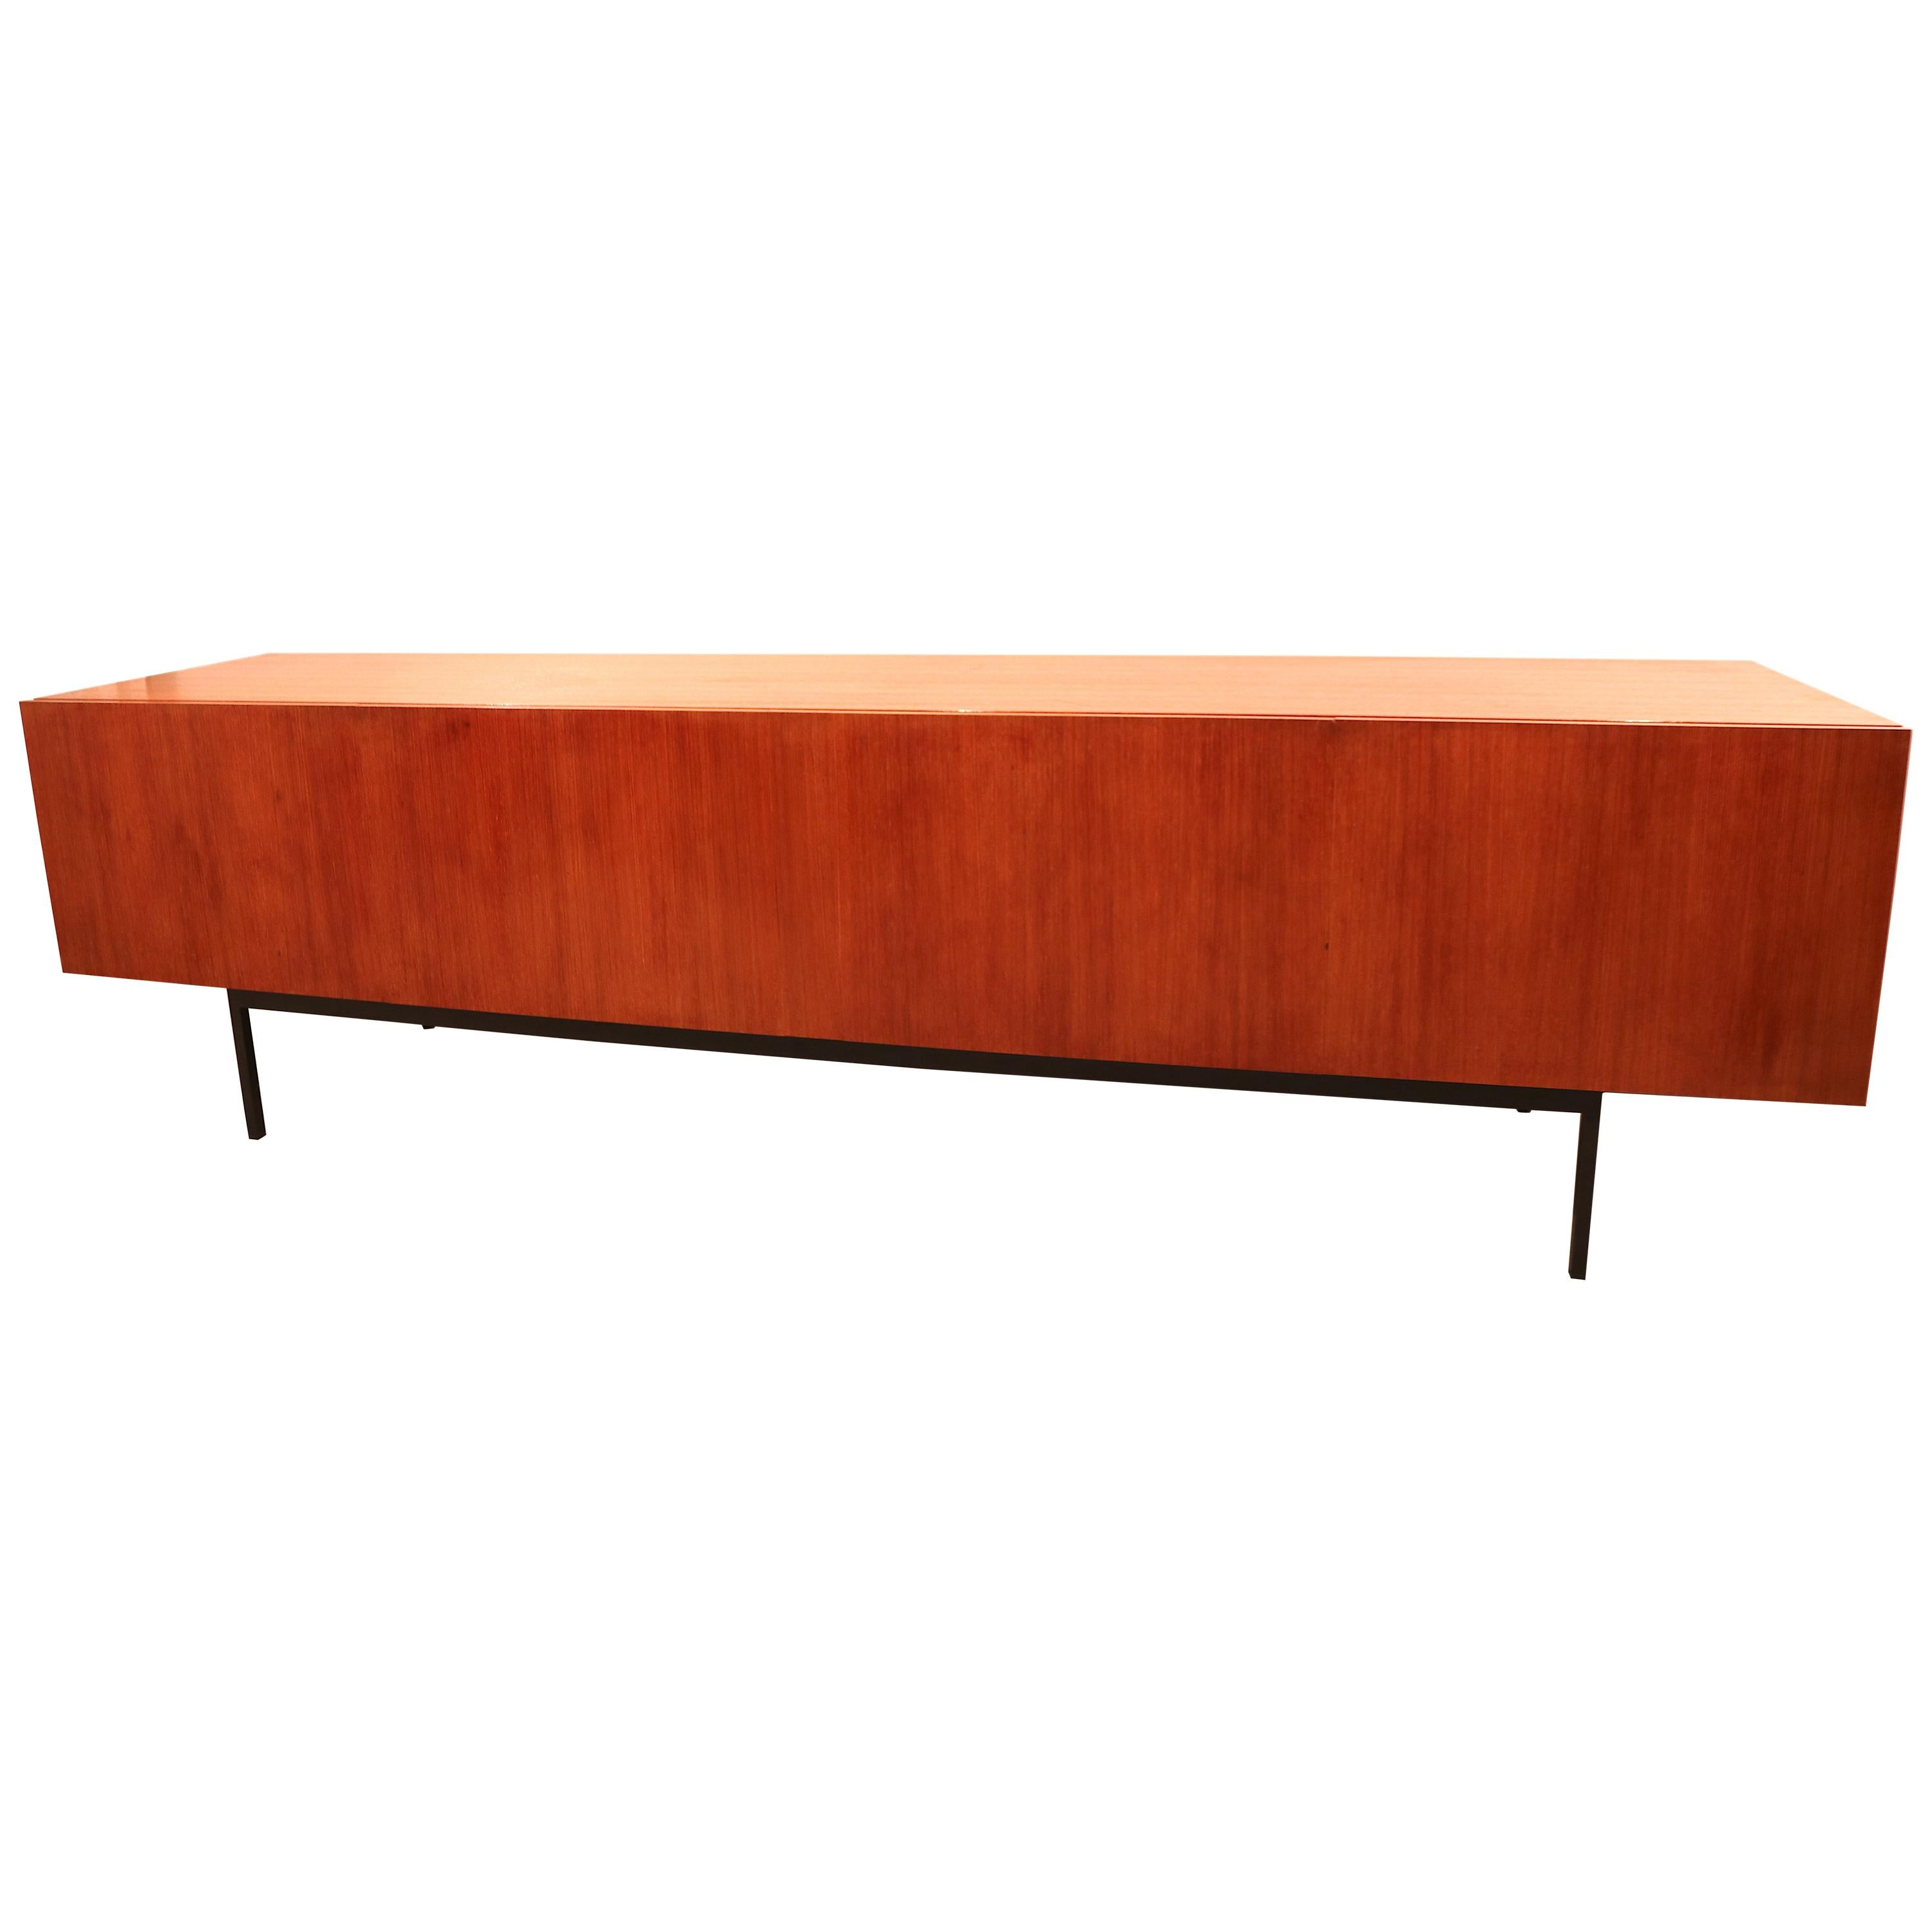 Sideboard Credenza Model B40 by Dieter Wackerlin for Behr, Germany, 1950s For Sale